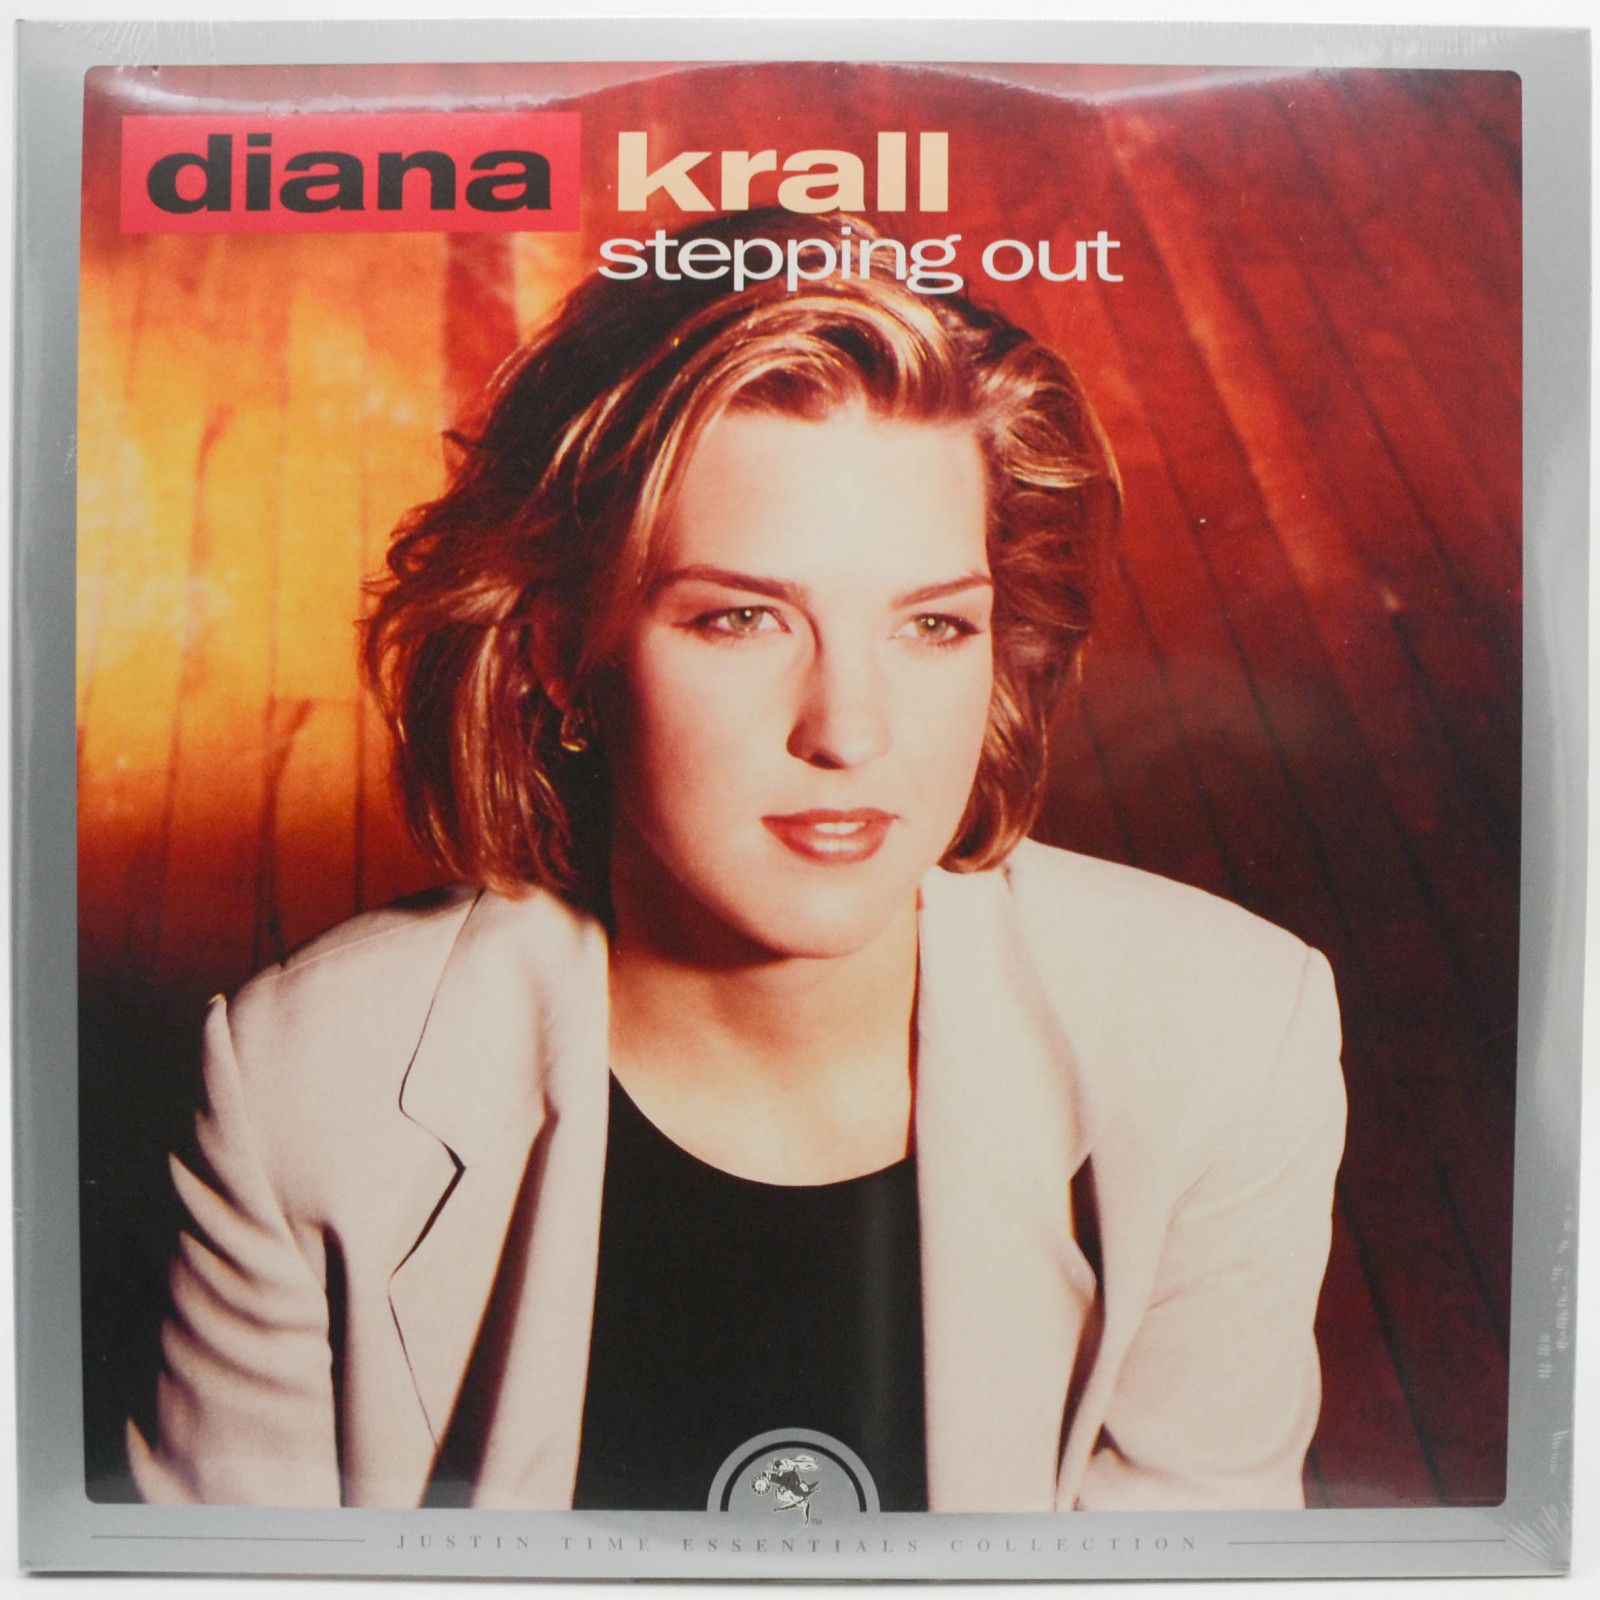 Diana Krall — Stepping Out (2LP), 1993